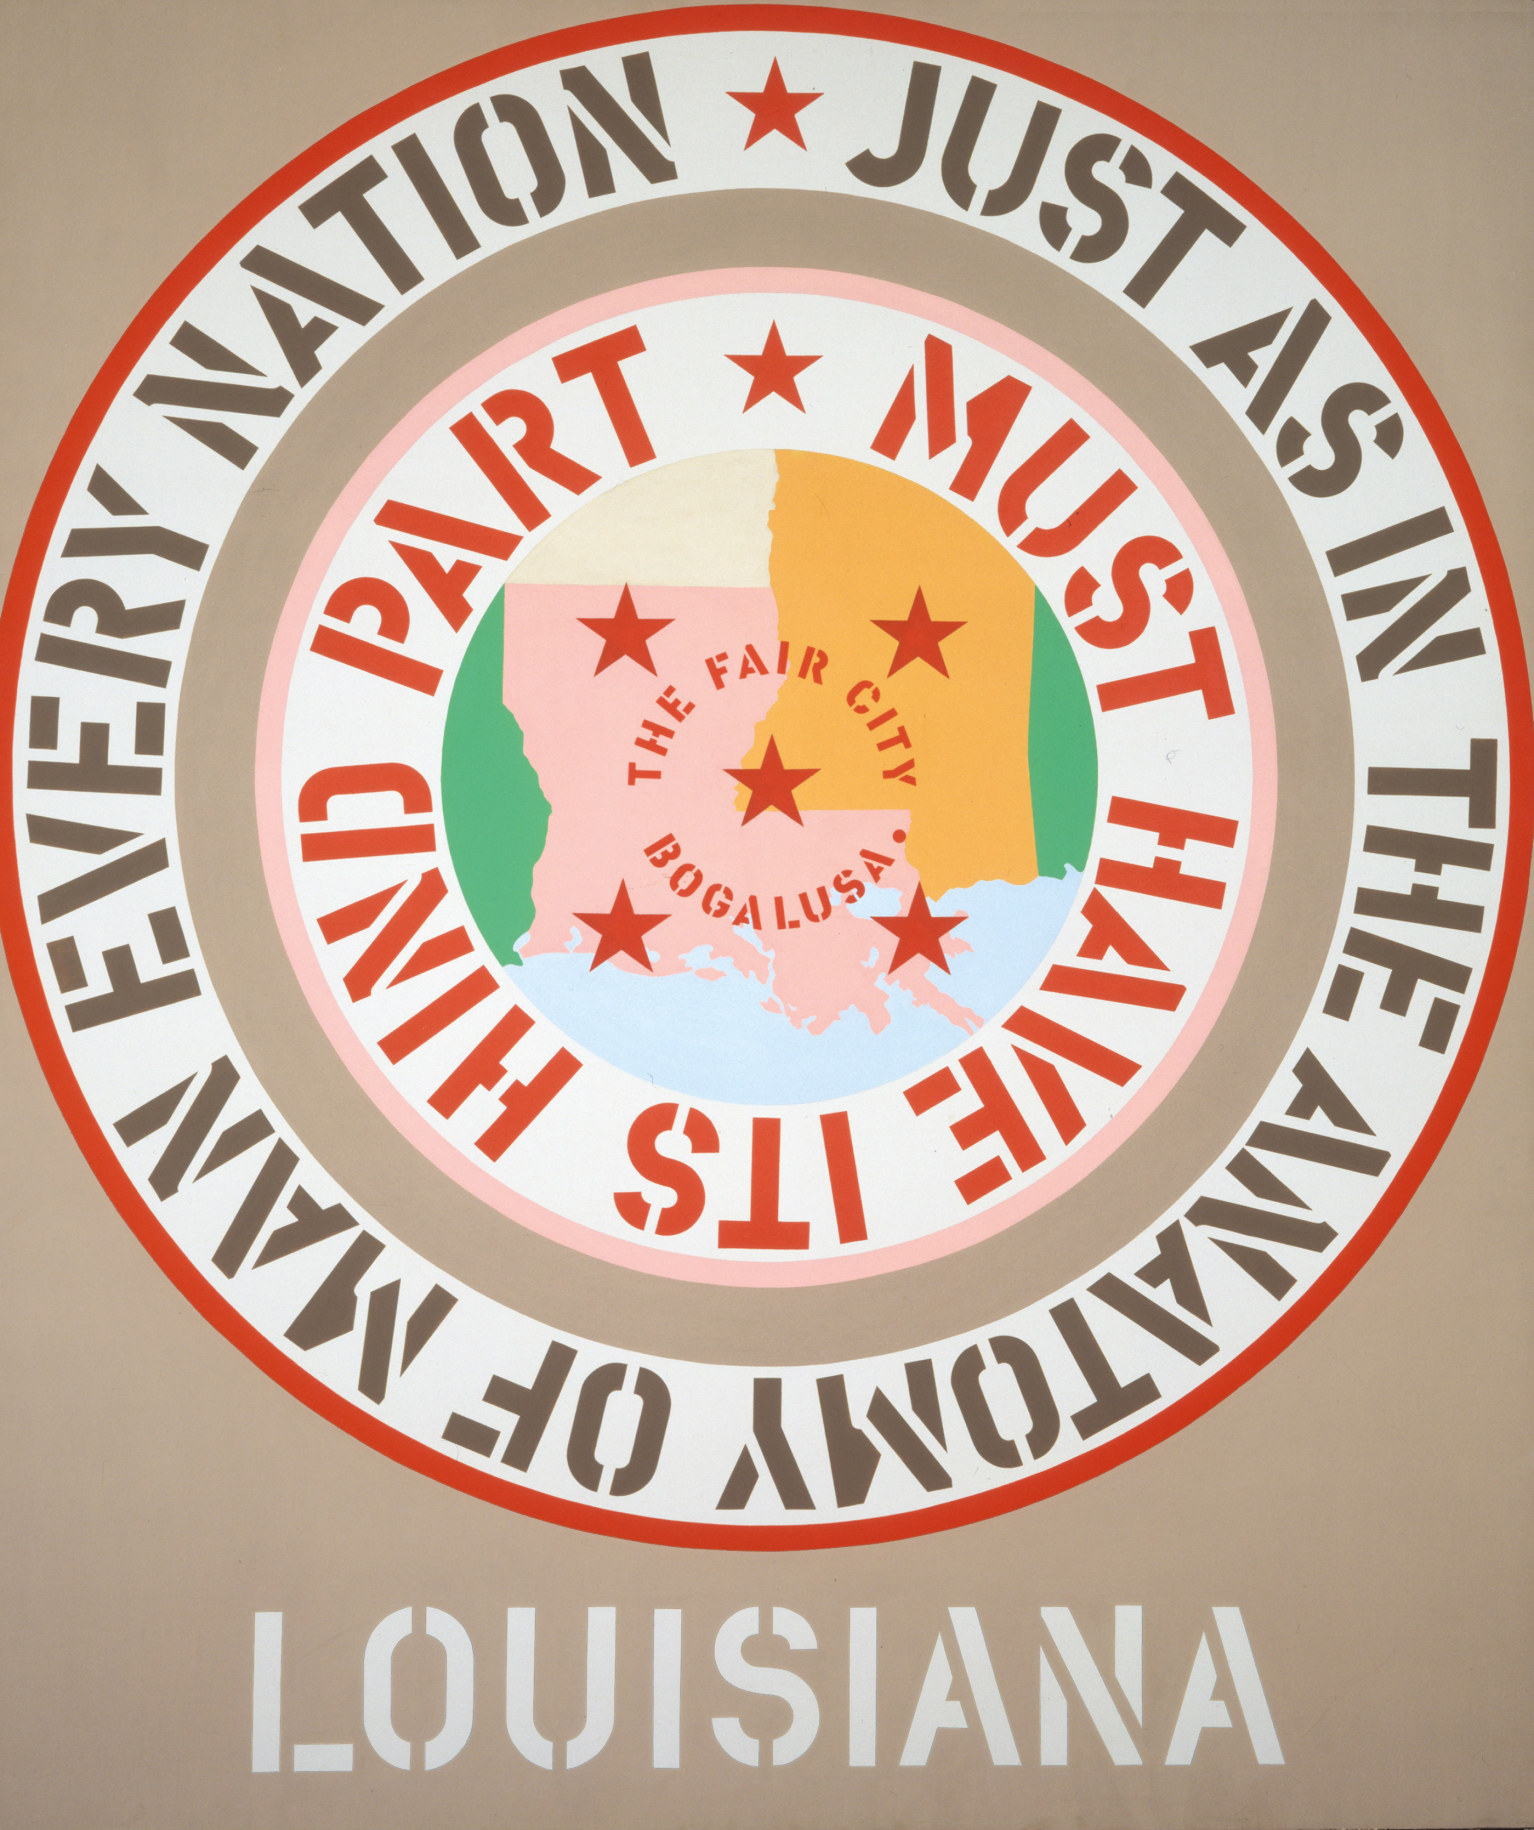 A 70 by 60 inch beige canvas with the title, Louisiana, painted in white stenciled letters across the center bottom edge of the painting. Above the title and dominating the canvas is a large circle consisting of a pink image of the state of Louisiana, with &quot;The Fair City Bogalusa&quot; shown on the map. Around this image is a white ring with stenciled red text surrounded by a beige ring and another white ring with brown stenciled text. The text reads, starting in the outer ring, &quot;Just as in the anatomy of man every nation,&quot; and in the inner ring &quot;must have its hind part.&quot;